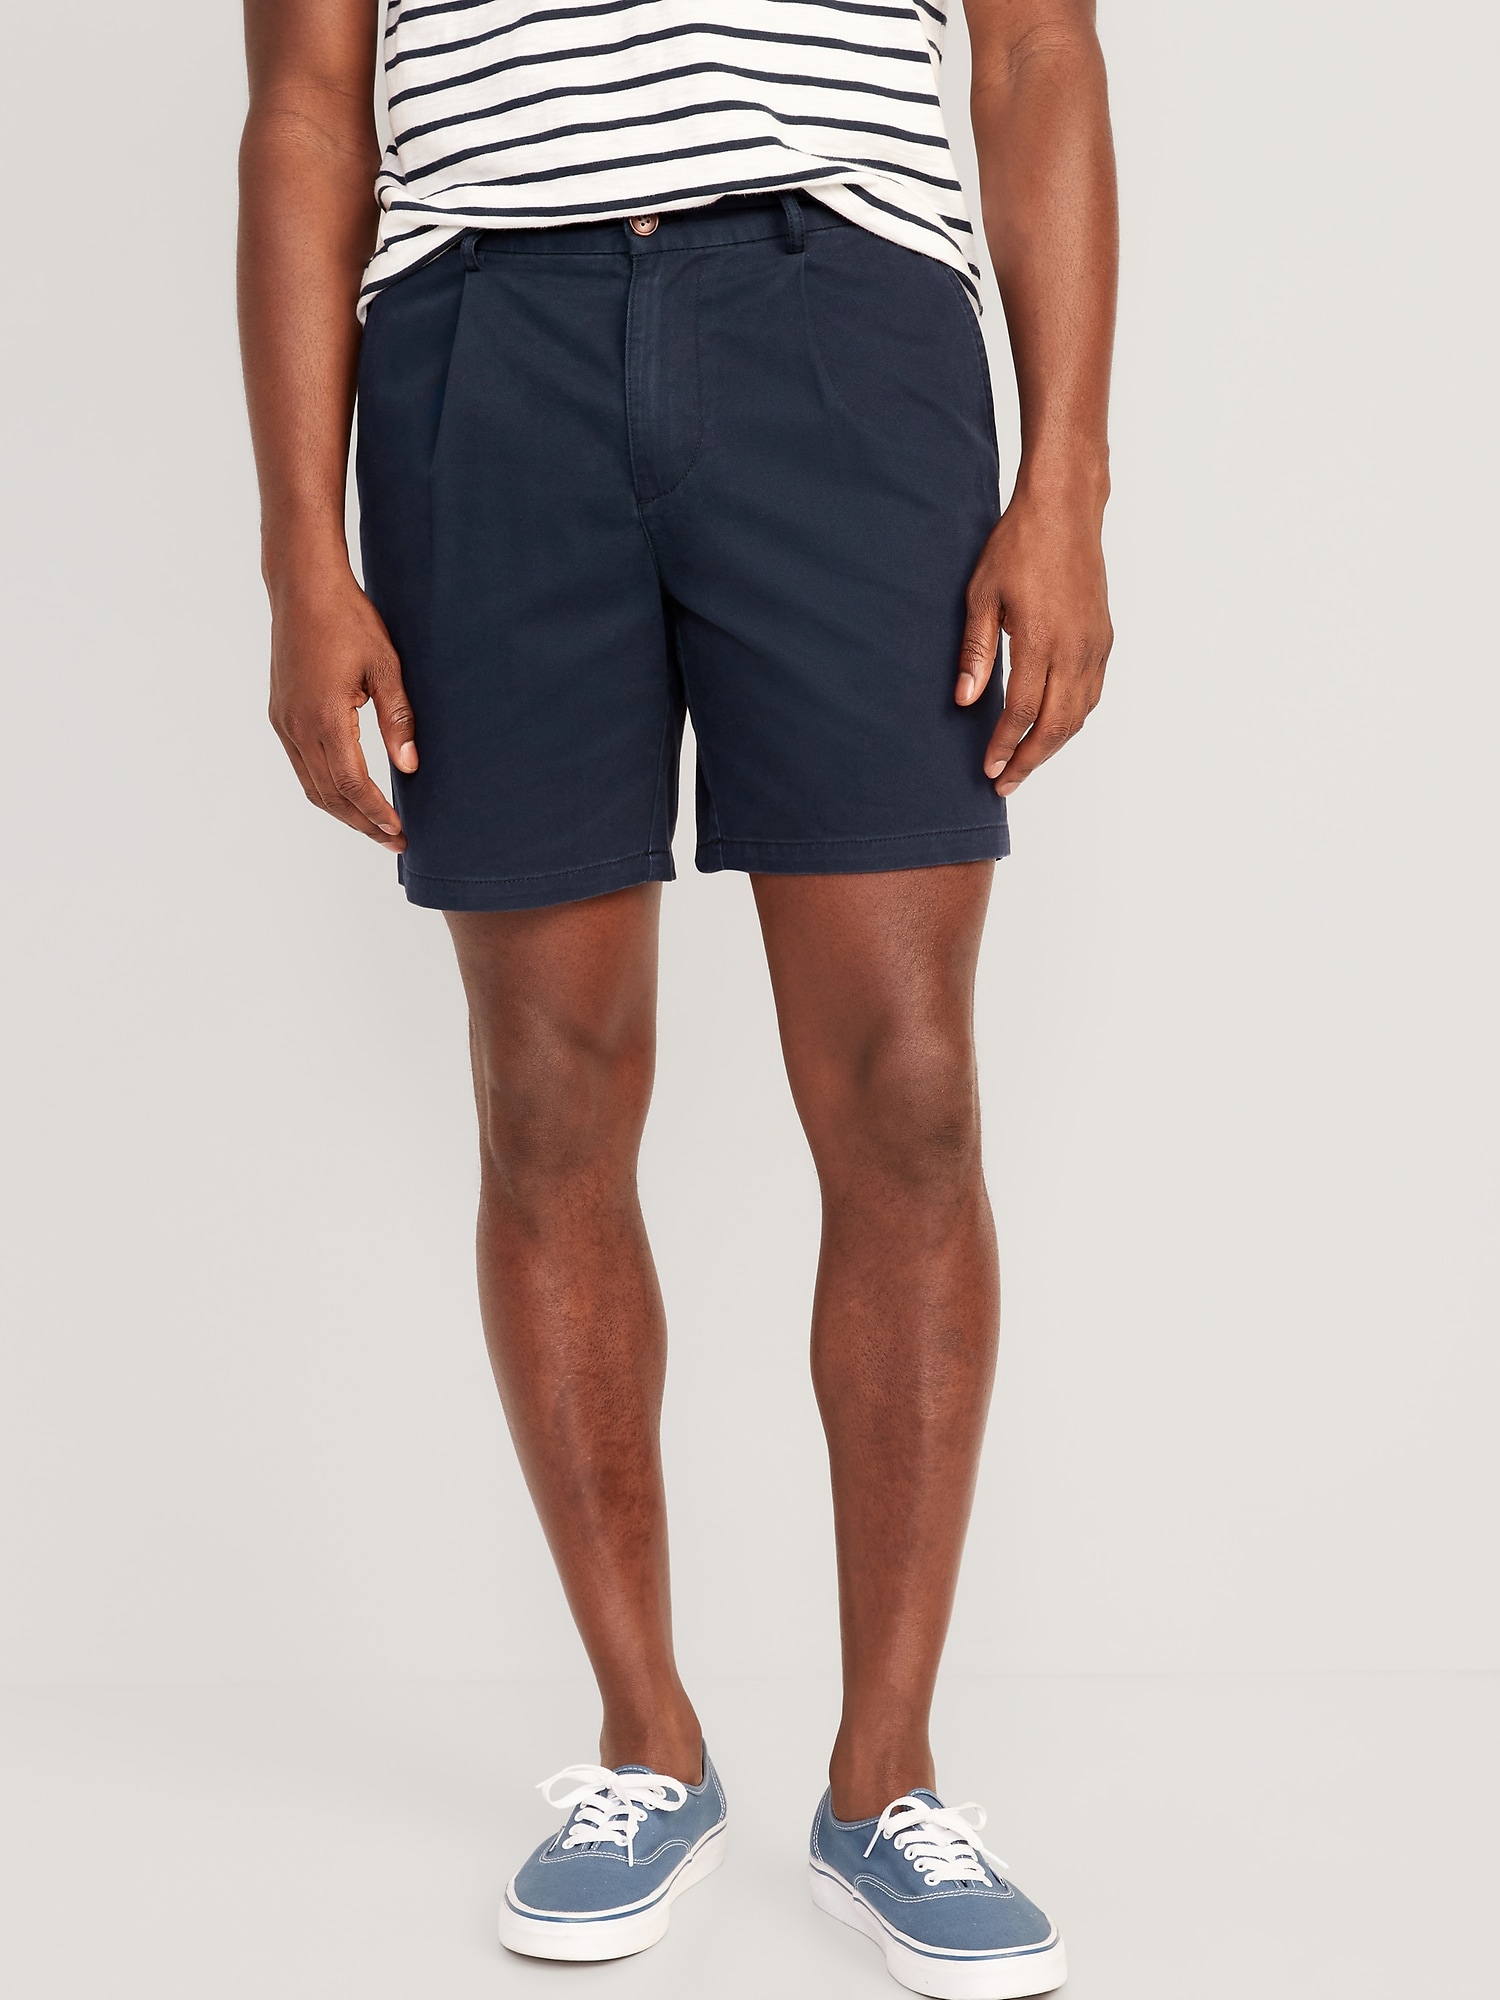 Old Navy Slim Built-In Flex Ultimate Chino Pleated Shorts for Men -- 7-inch inseam blue. 1